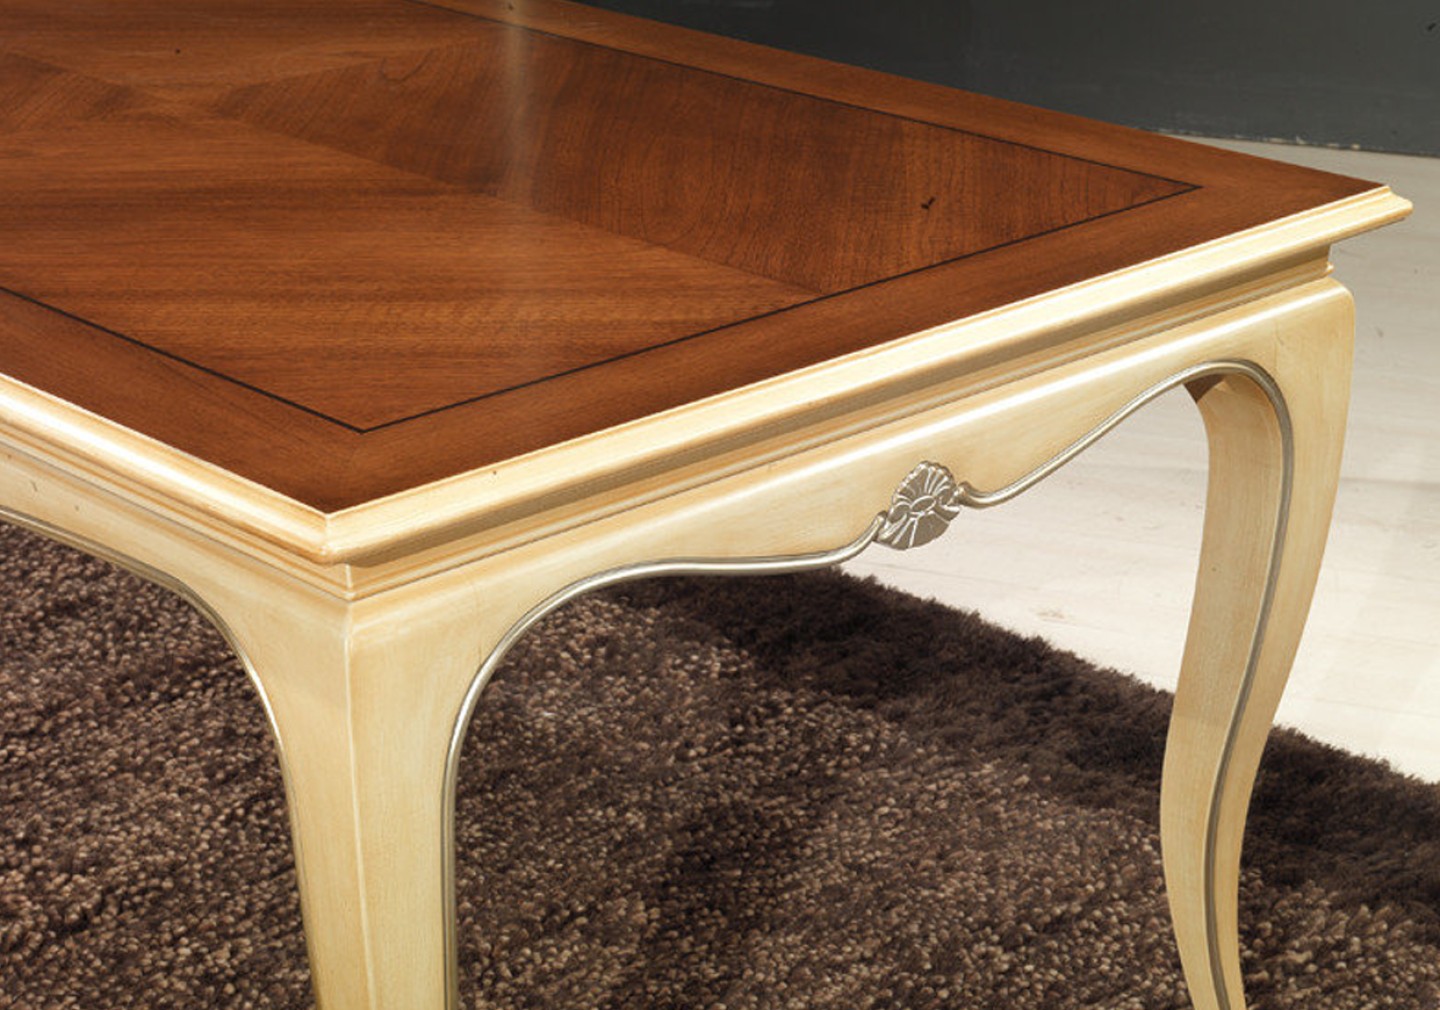 THE ARIEL CLASSIC DINING TABLE